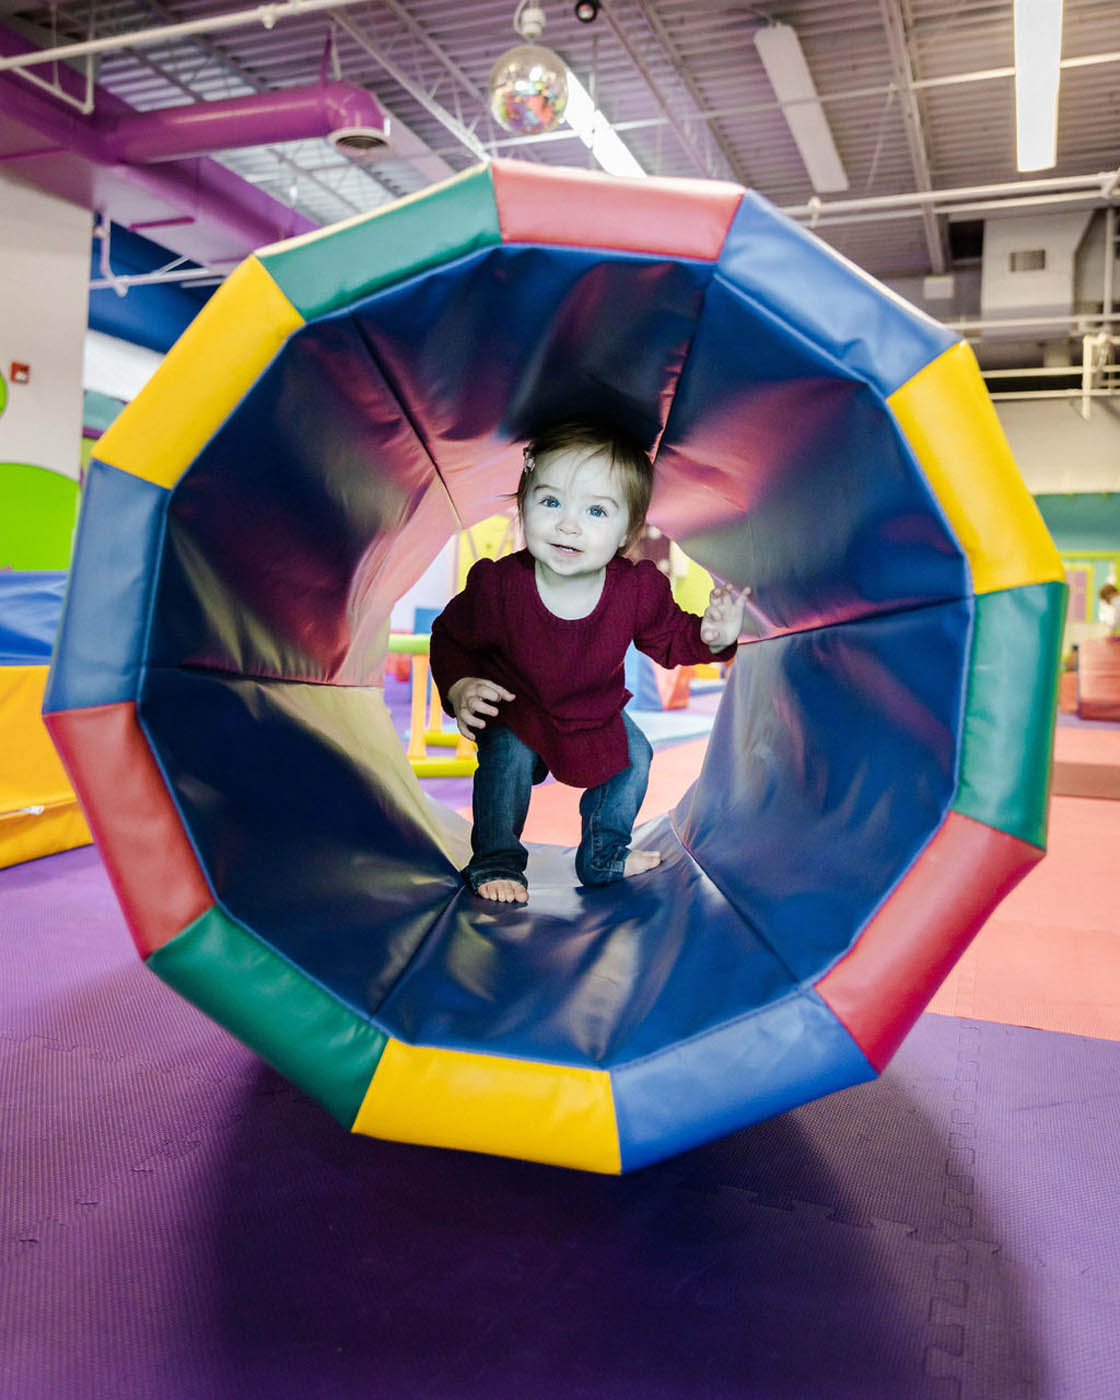 A little girl running through a matt tunnel, contact us for more indoor kids activities in Wethersfield, CT.